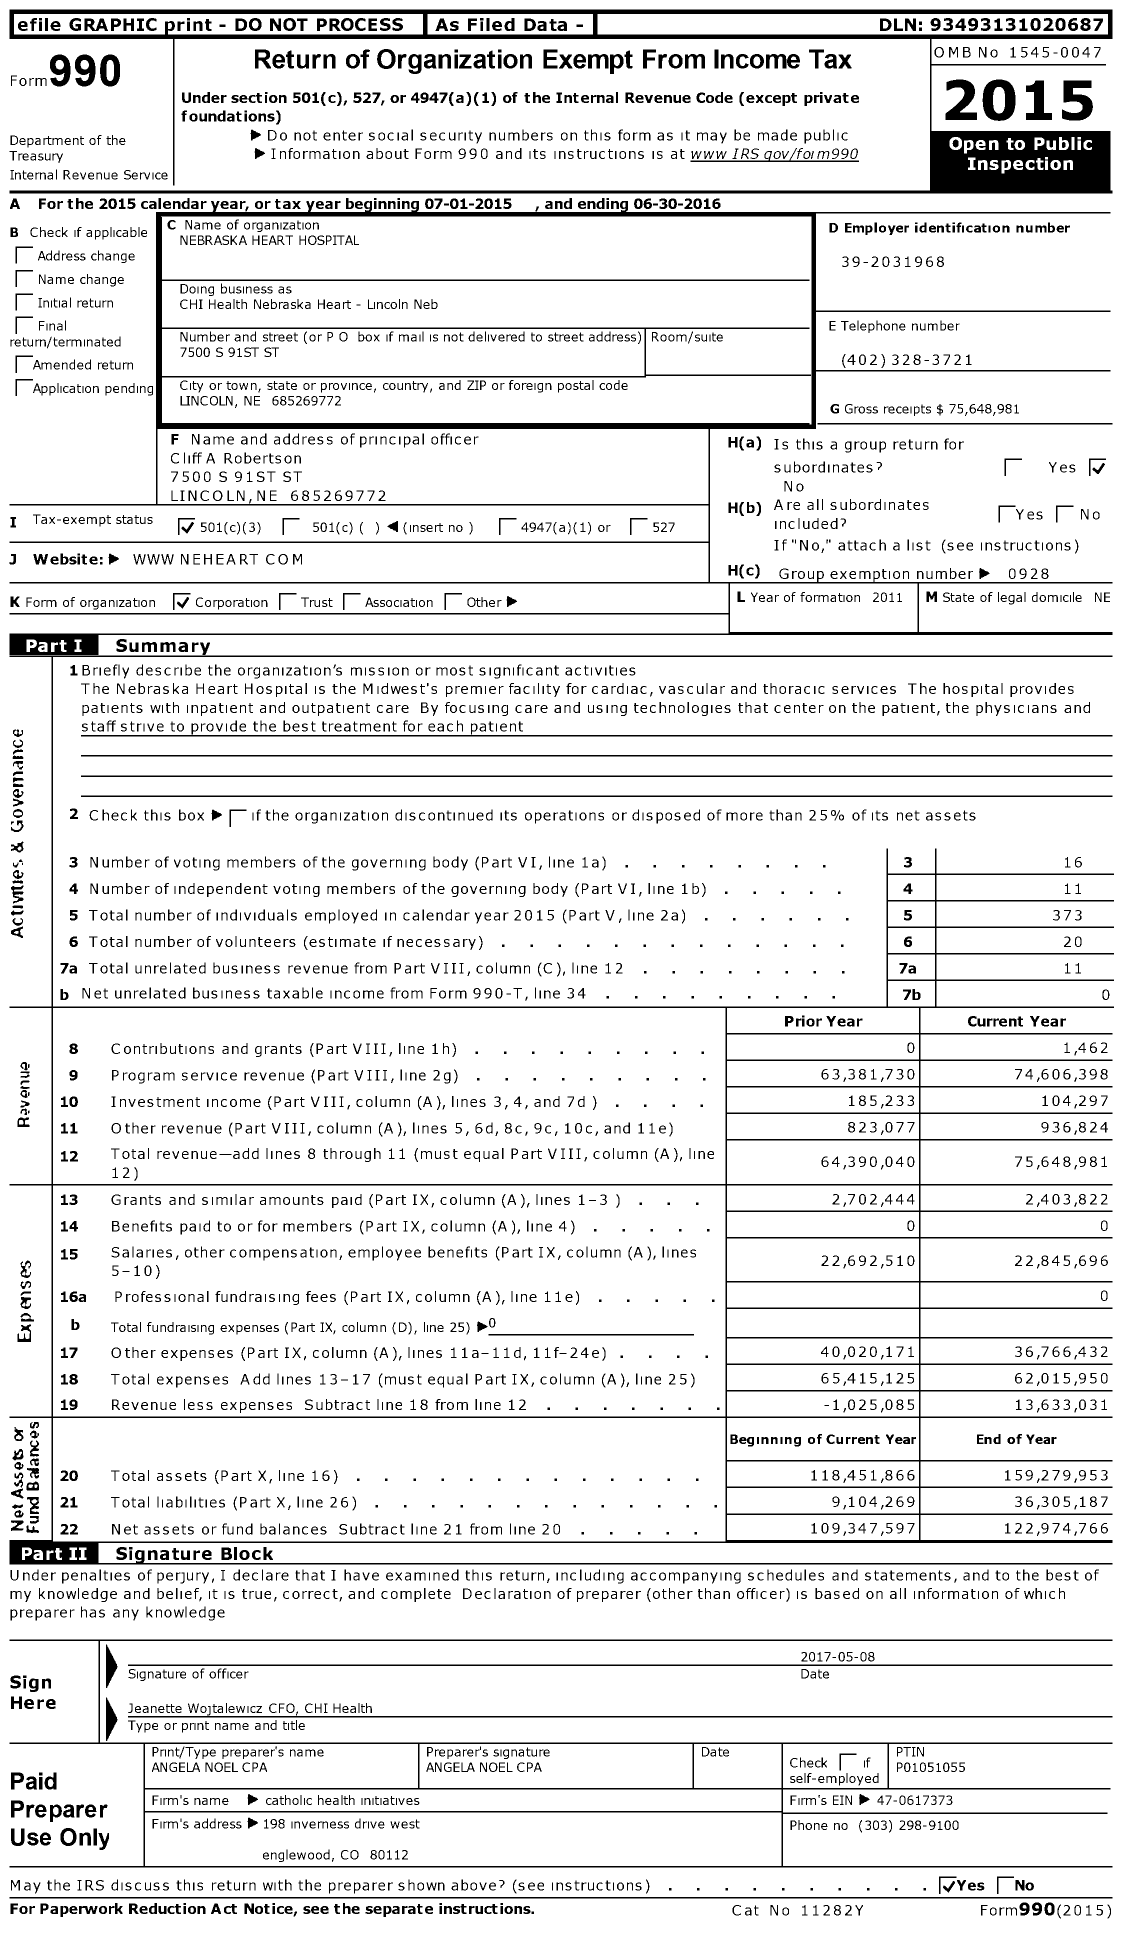 Image of first page of 2015 Form 990 for CHI Health Nebraska Heart (NHH)